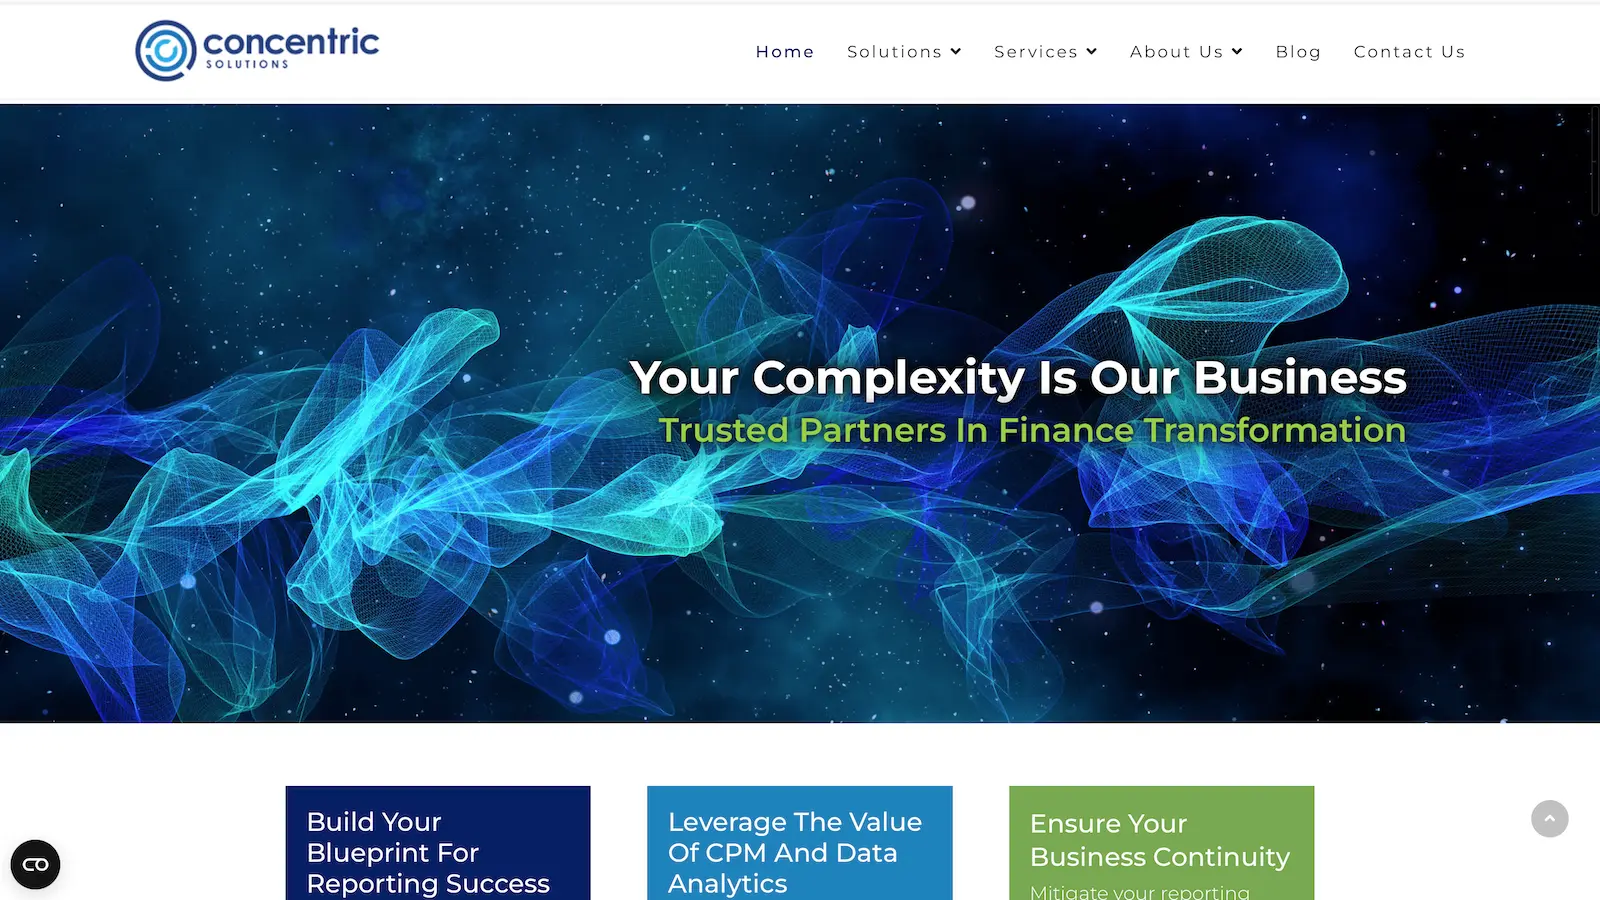 concentric solutions homepage screenshot